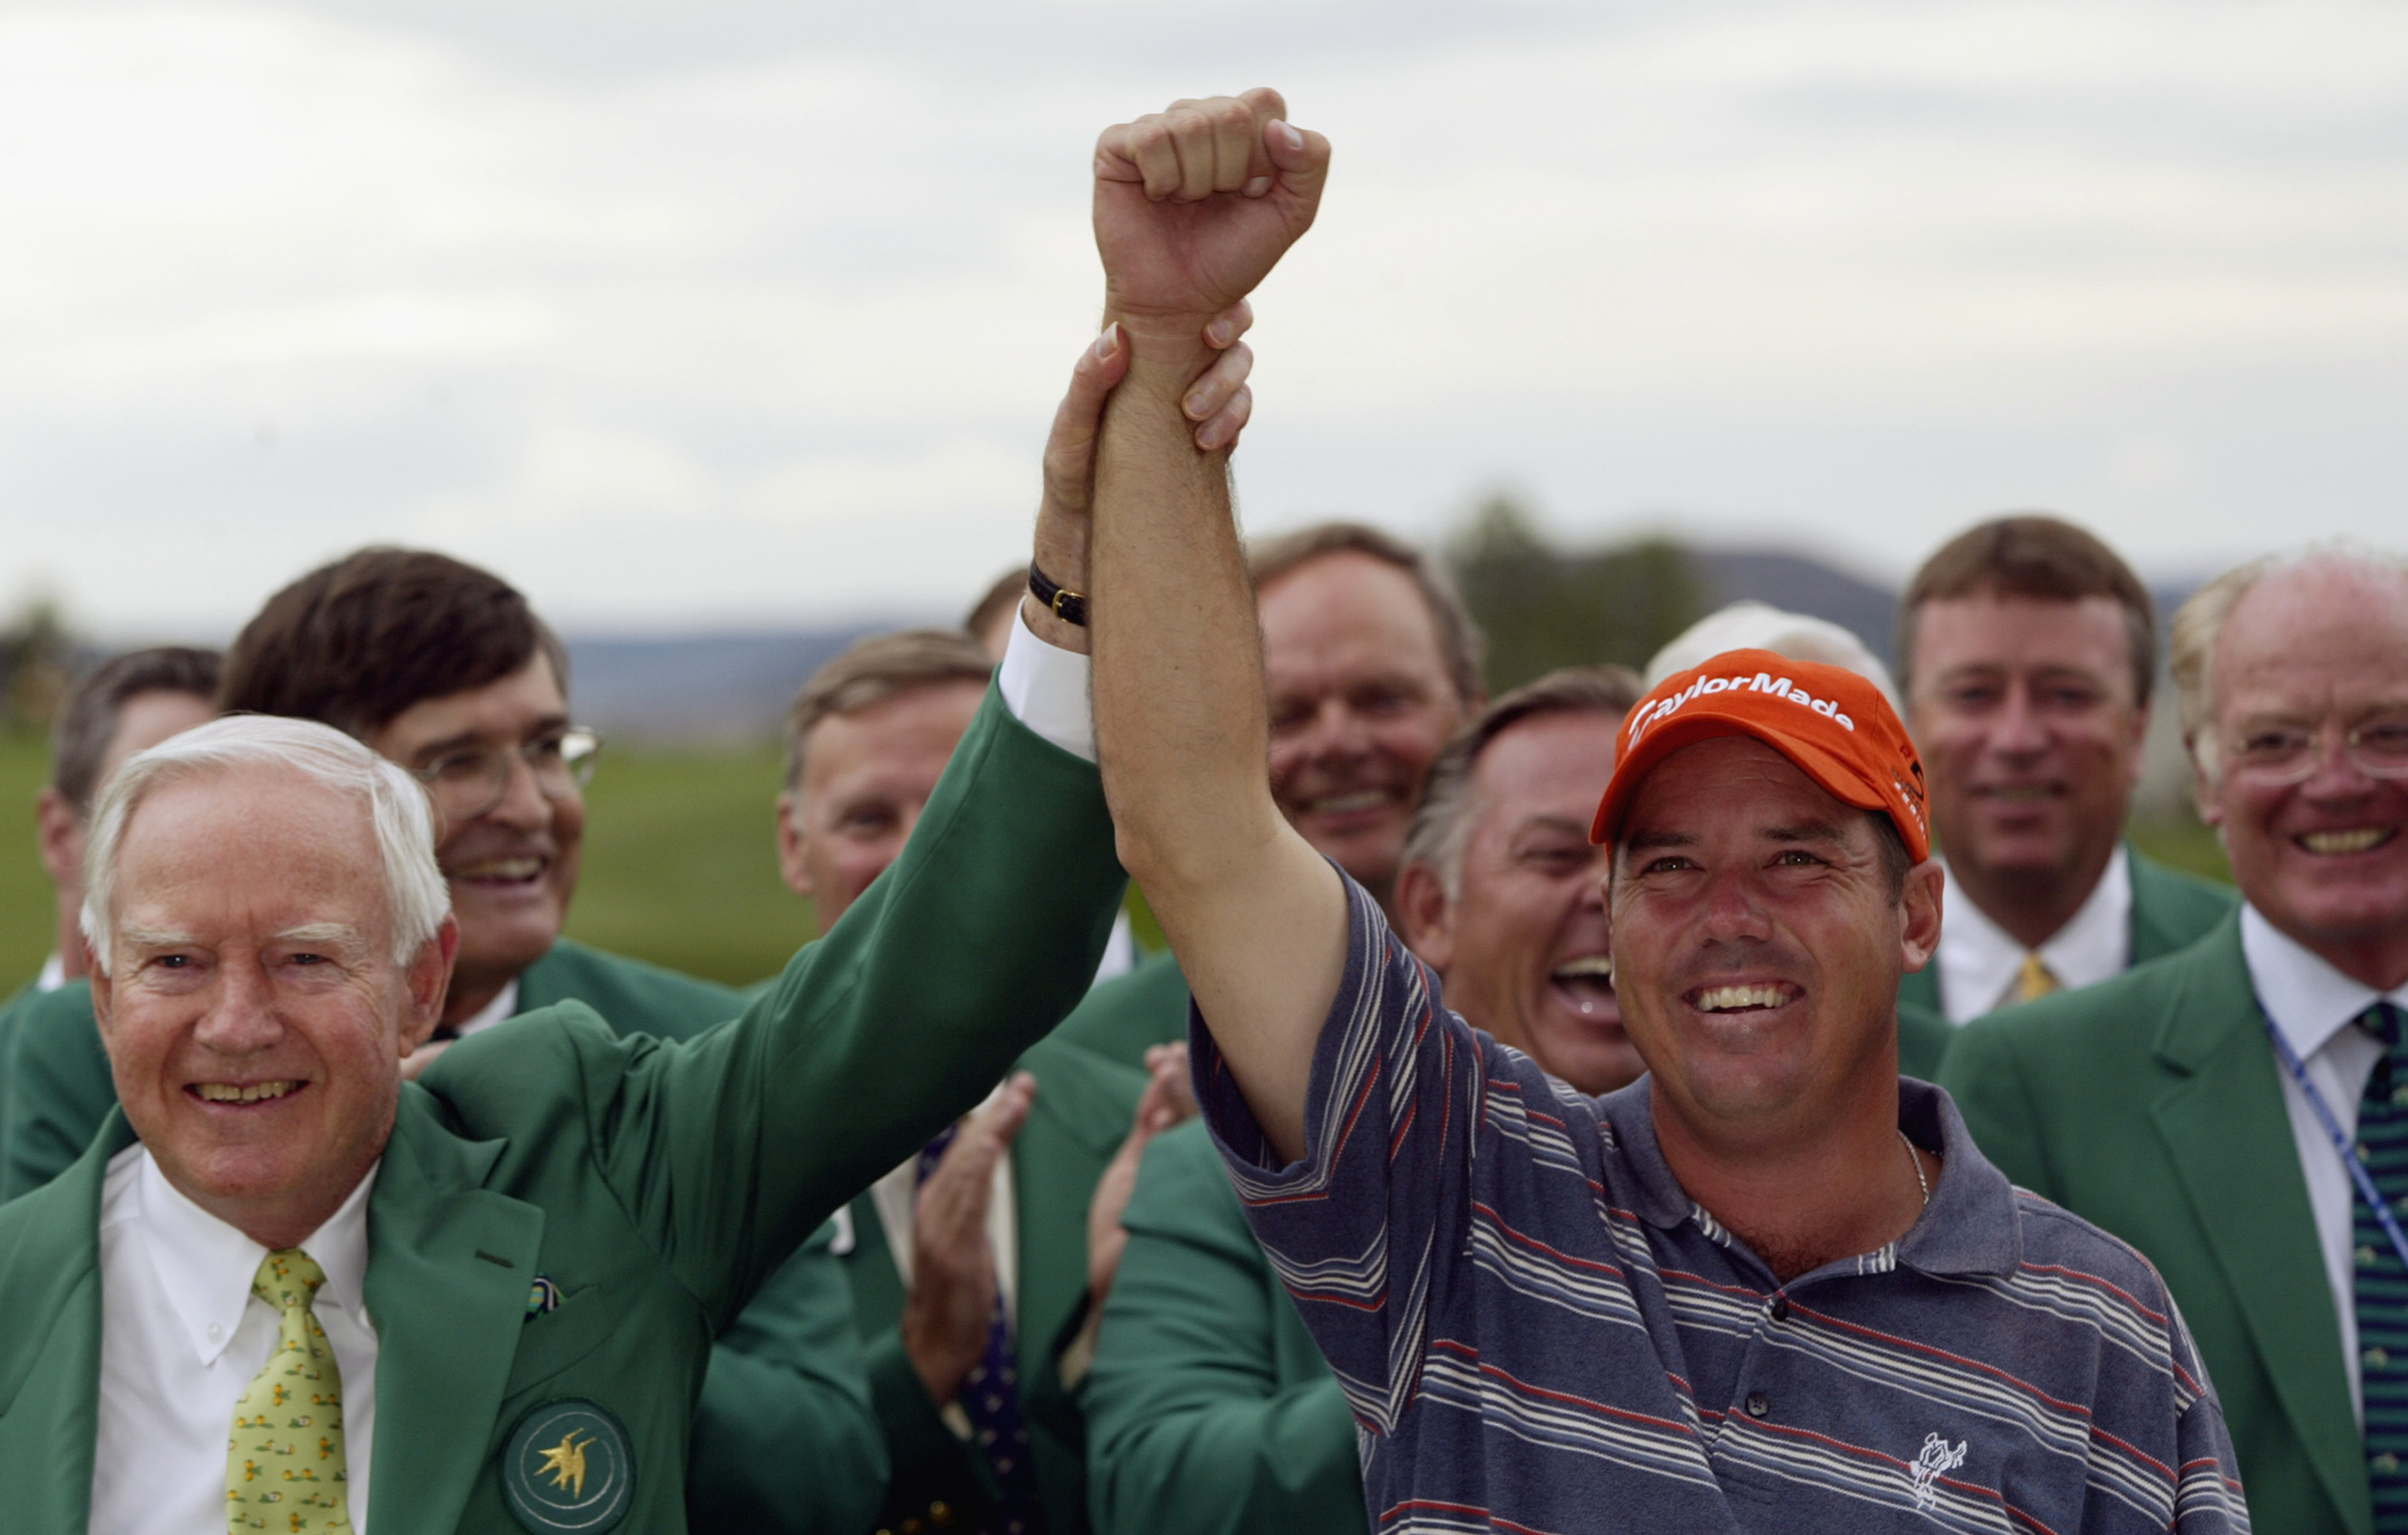 Rich Beem wins the International at Castle Pines Golf Club on Aug. 4, 2002, by 1 point over Steve Lowery. Beem finished with a +44, adding 19 on the day in the modified Stableford system -- one point shy of the course record.